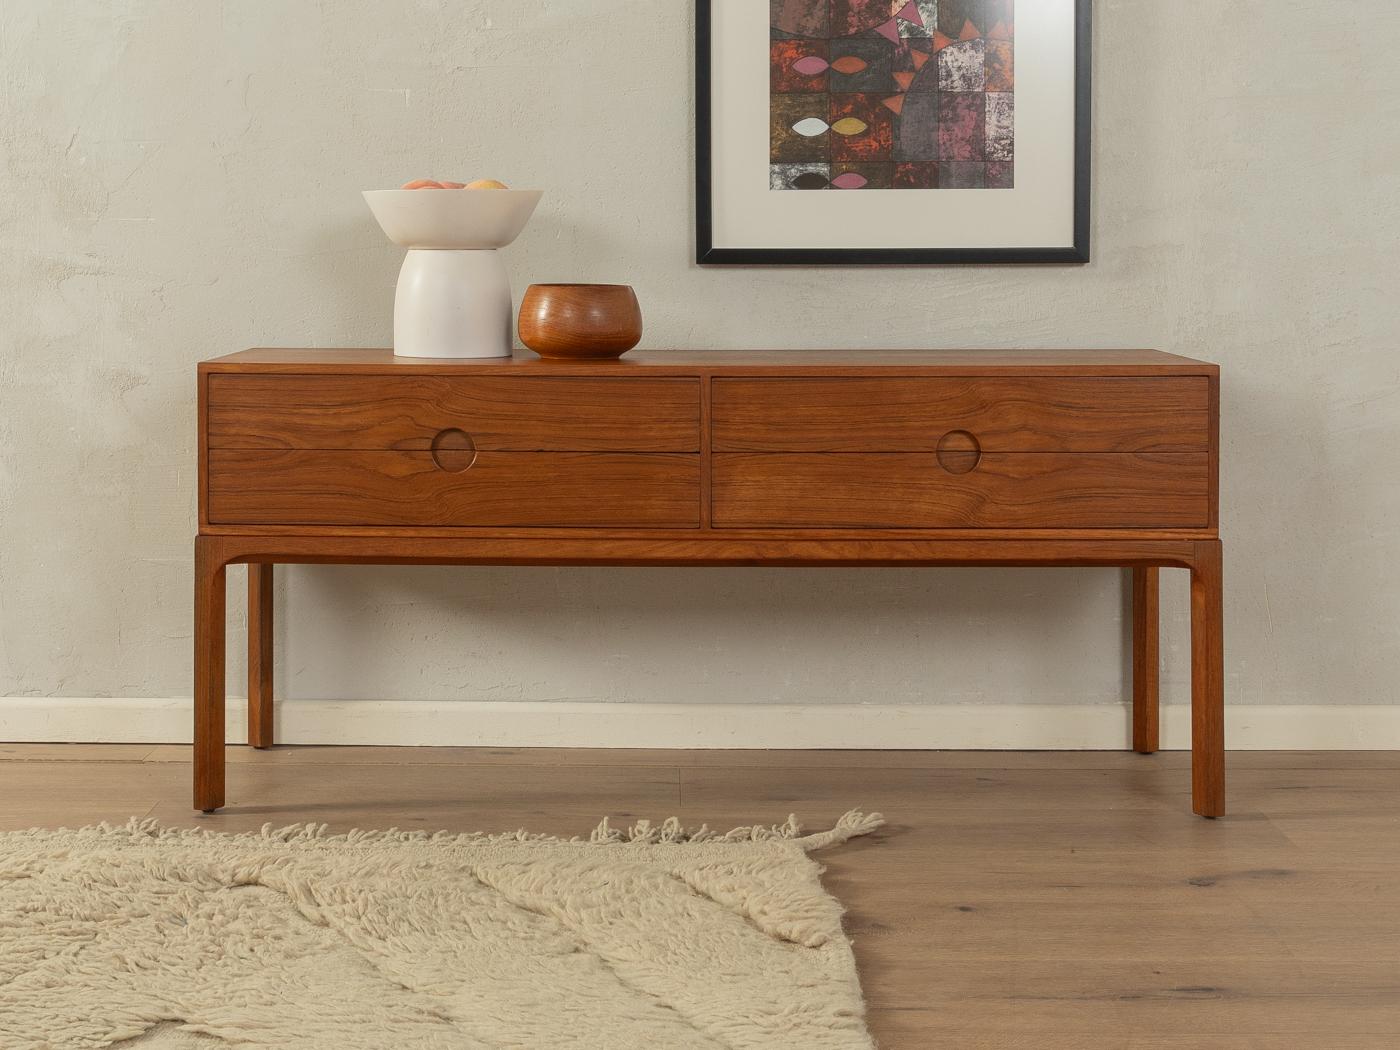 Wonderful chest of drawers, model 394, by Kai Kristiansen for Aksel Kjersgaard from the 1960s. Corpus in teak veneer with four drawers and straight feet.
Quality Features:

    accomplished design: perfect proportions and visible attention to